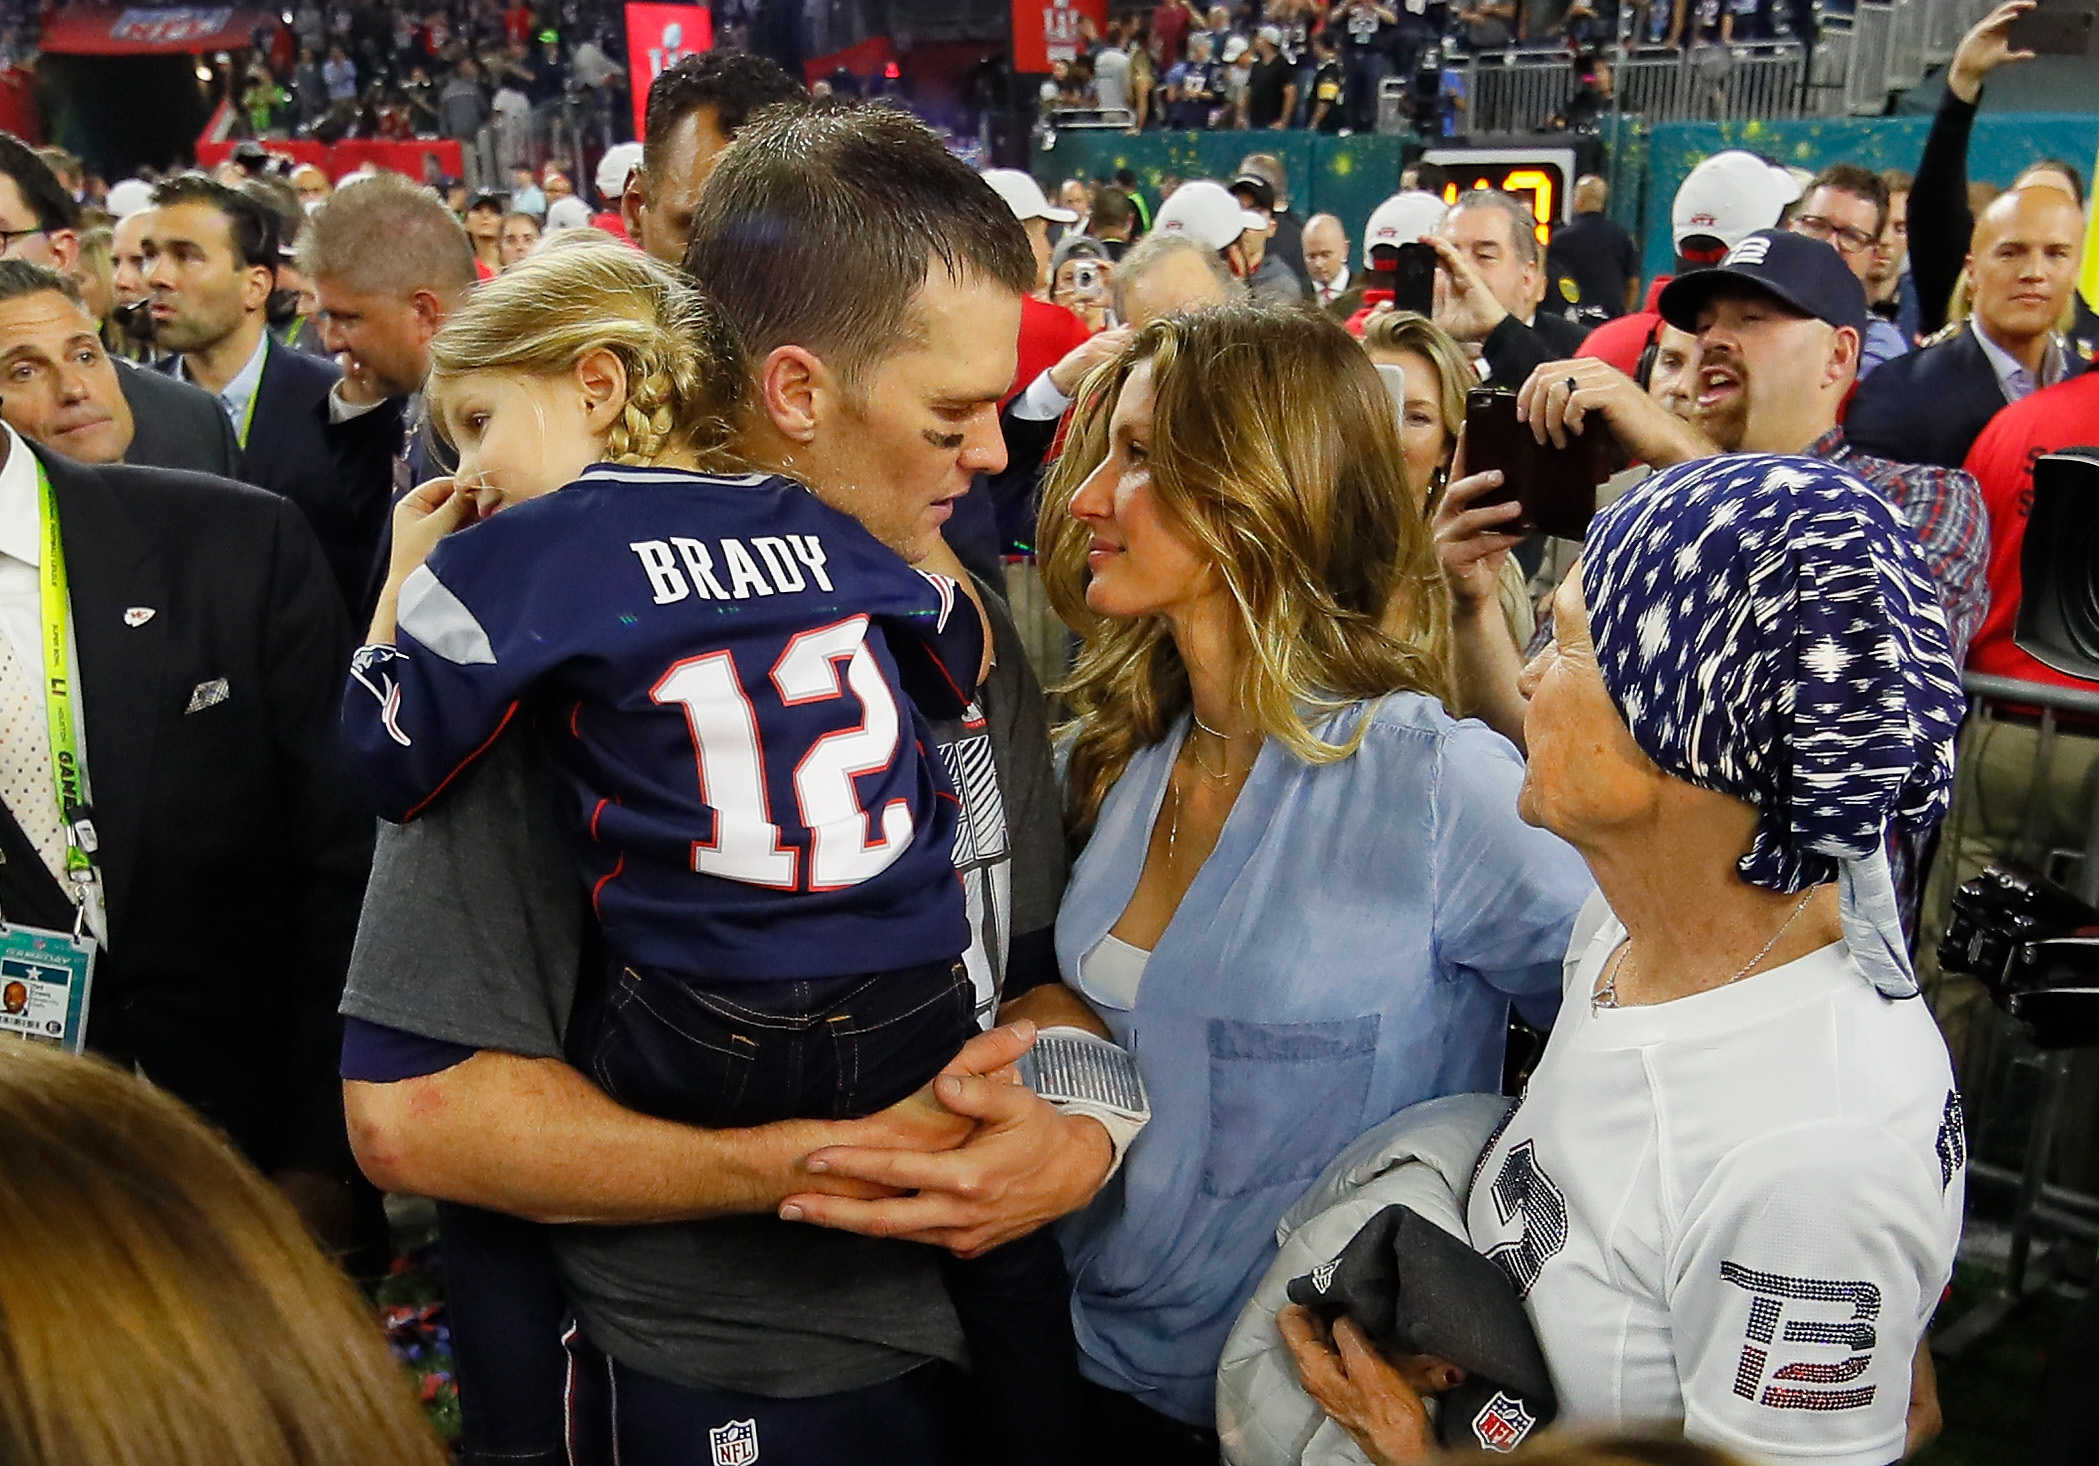 PHOTO: Tom Brady of the New England Patriots celebrates with wife Gisele Bundchen and daughter Vivian Brady after defeating the Atlanta Falcons during Super Bowl 51 at NRG Stadium on Feb. 5, 2017 in Houston.